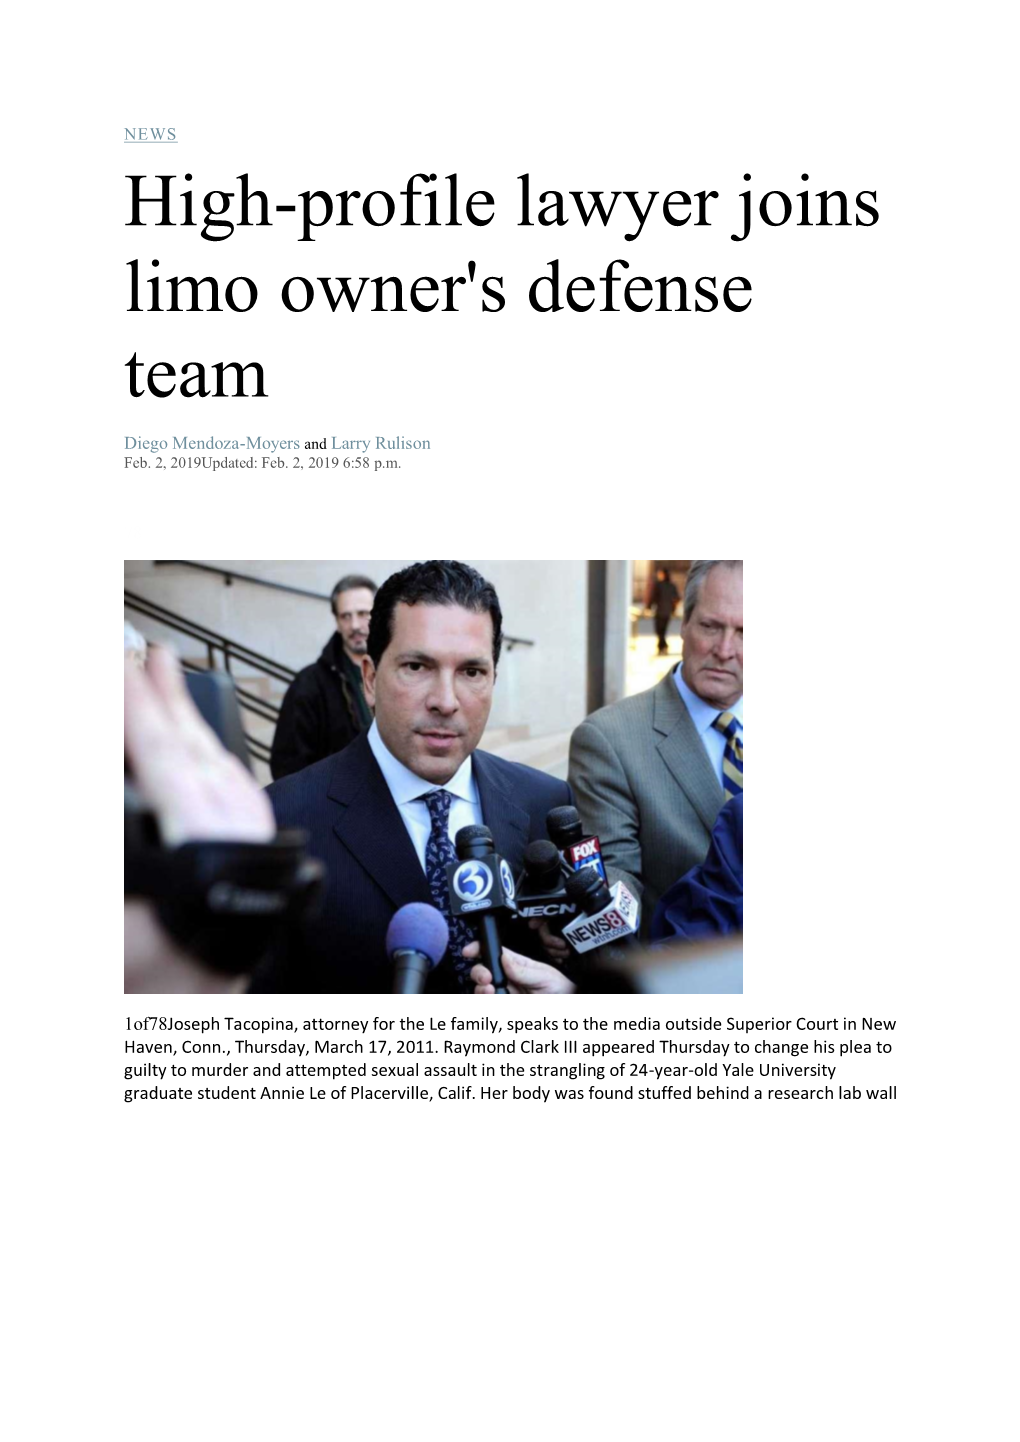 High-Profile Lawyer Joins Limo Owner's Defense Team